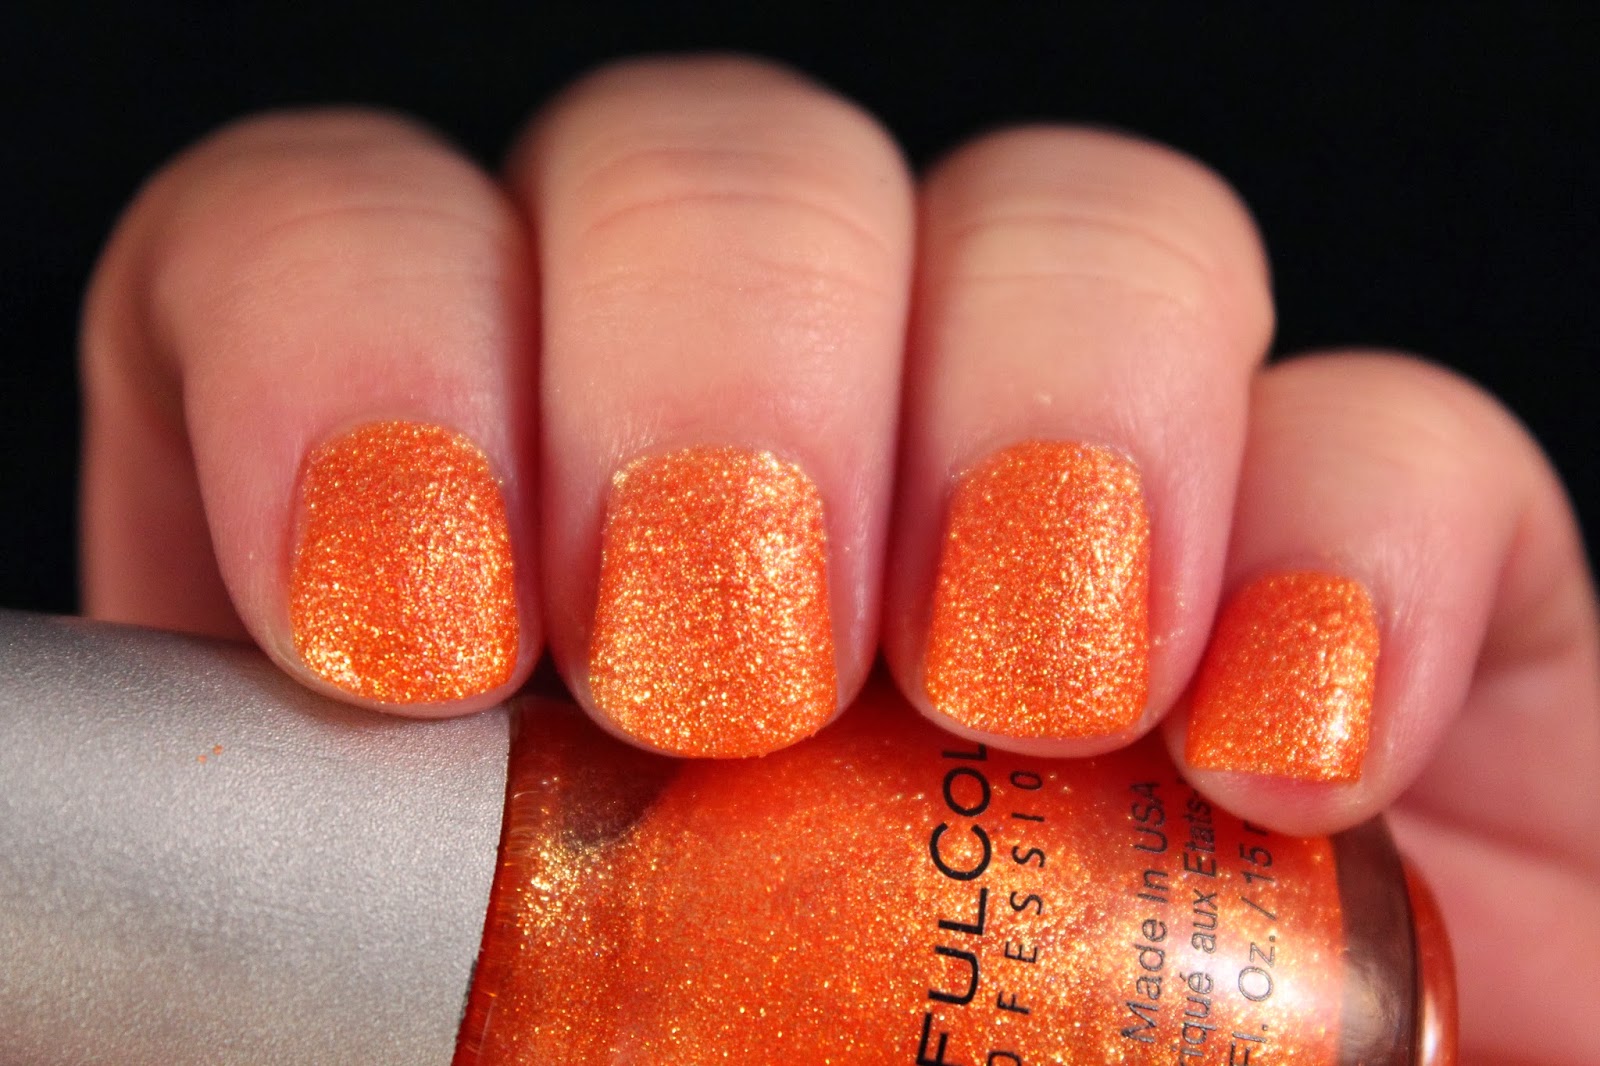 10. "Cantaloupe Crush" by Sinful Colors - wide 3